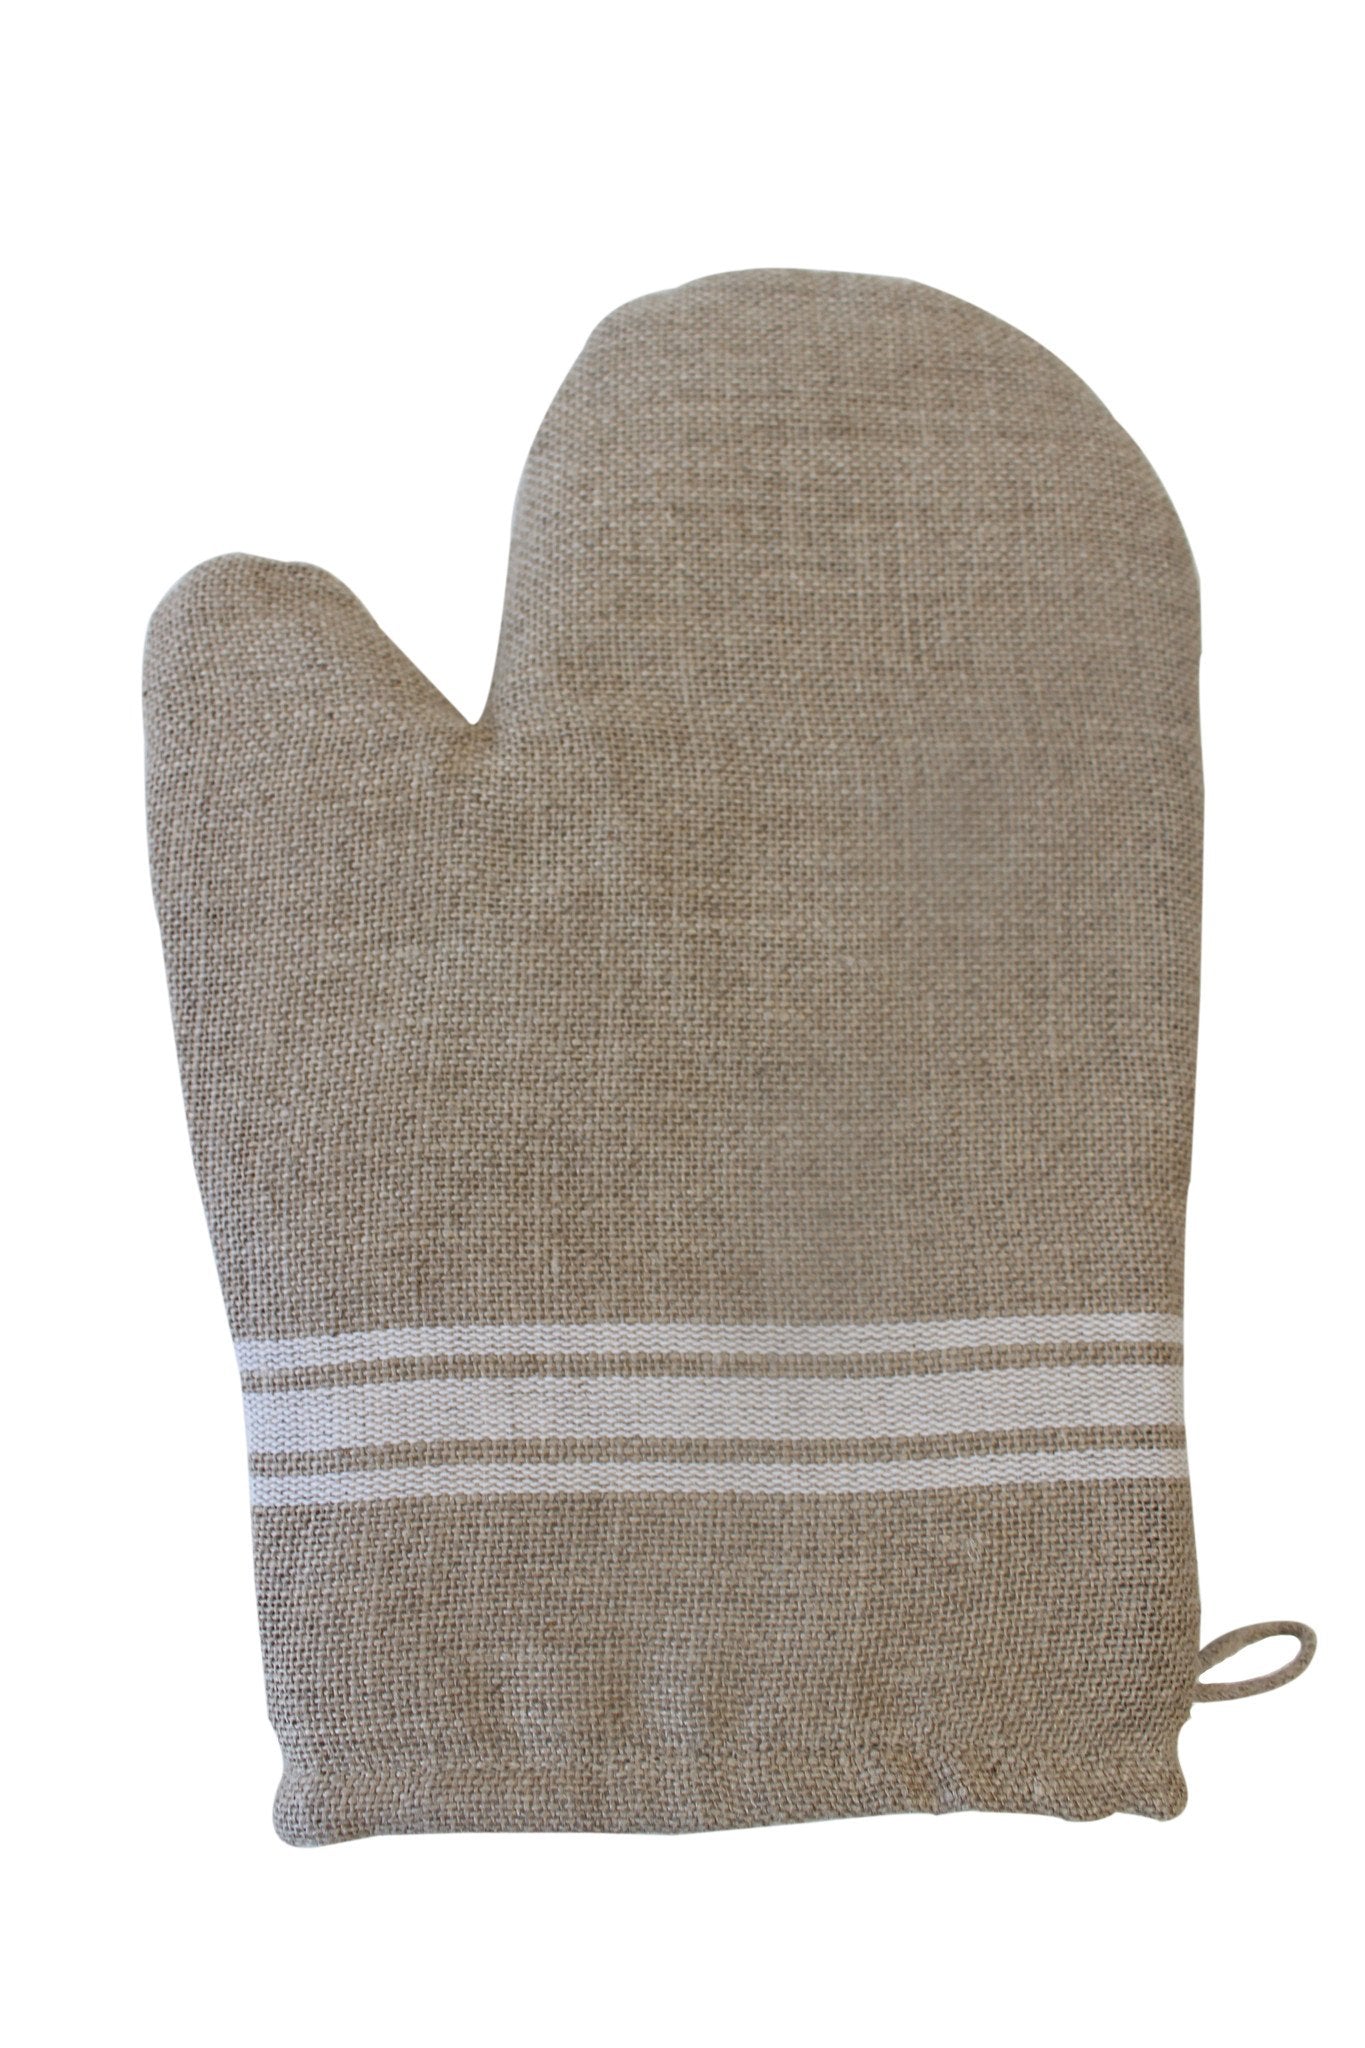 Thieffry Monogramme Linen Oven Mitts (Set of 2) – French Dry Goods